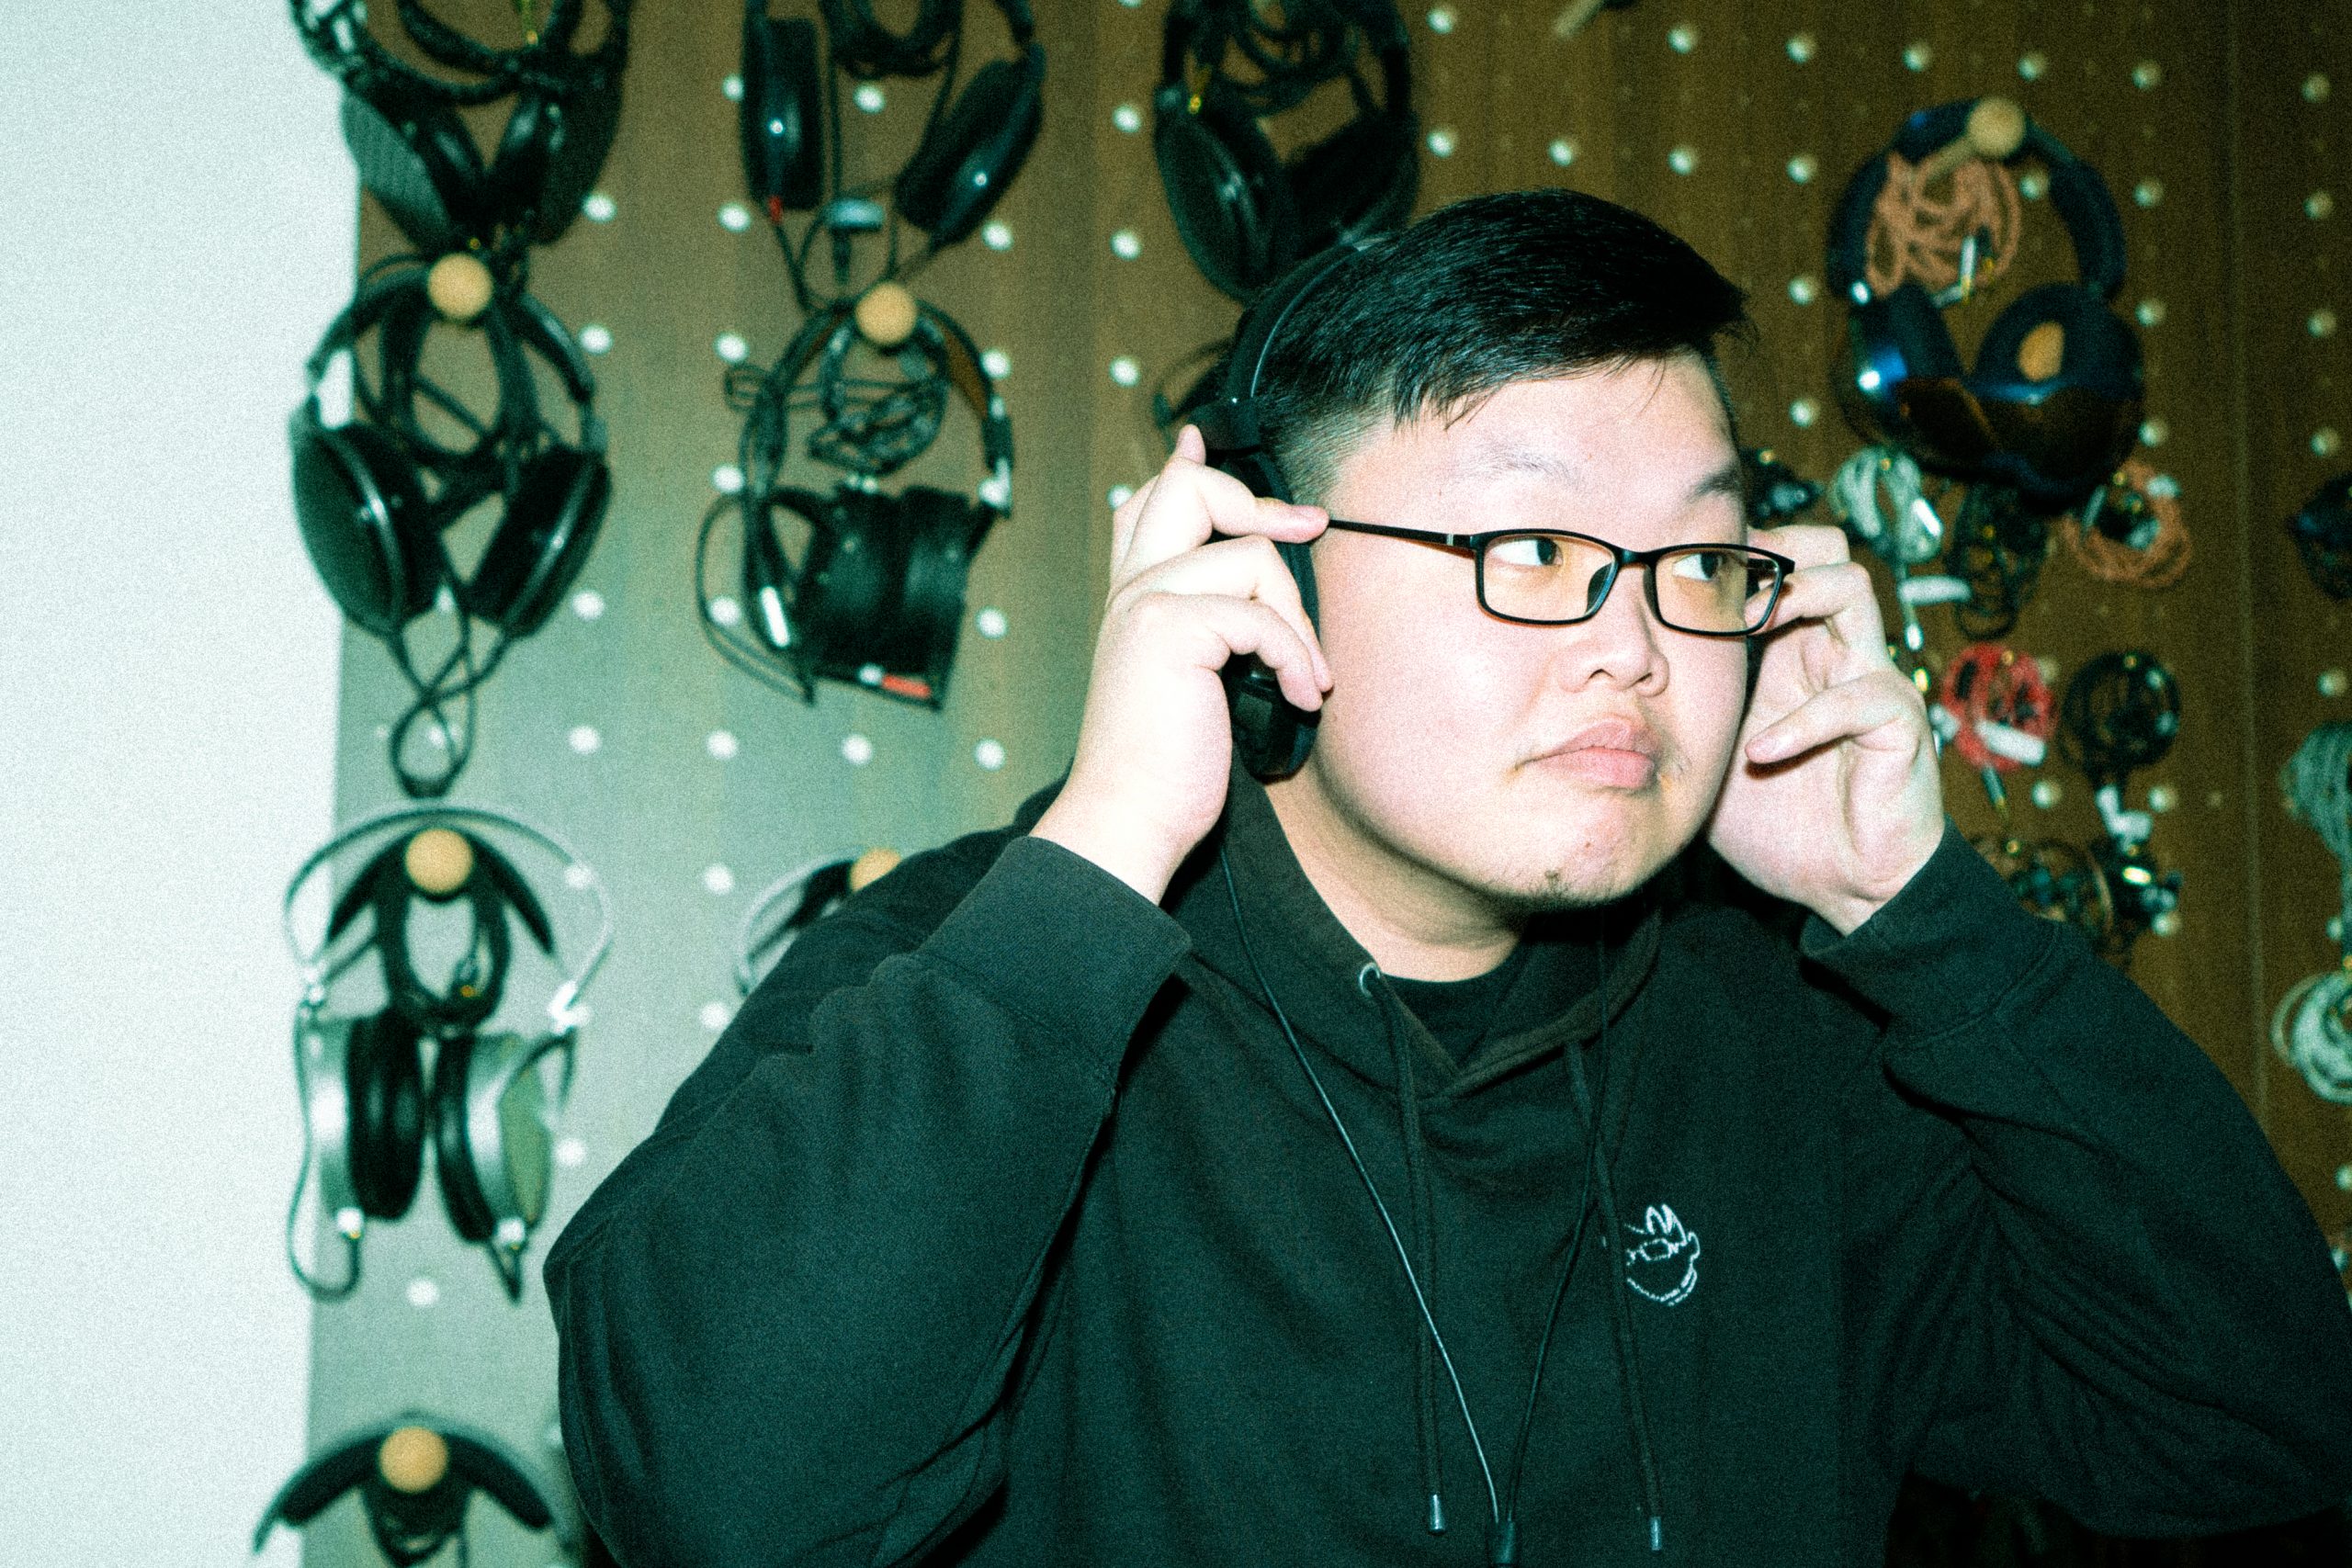 Crinacle Was A Broke Student With A Thing For High-End Audio. Now, He’s A Star.